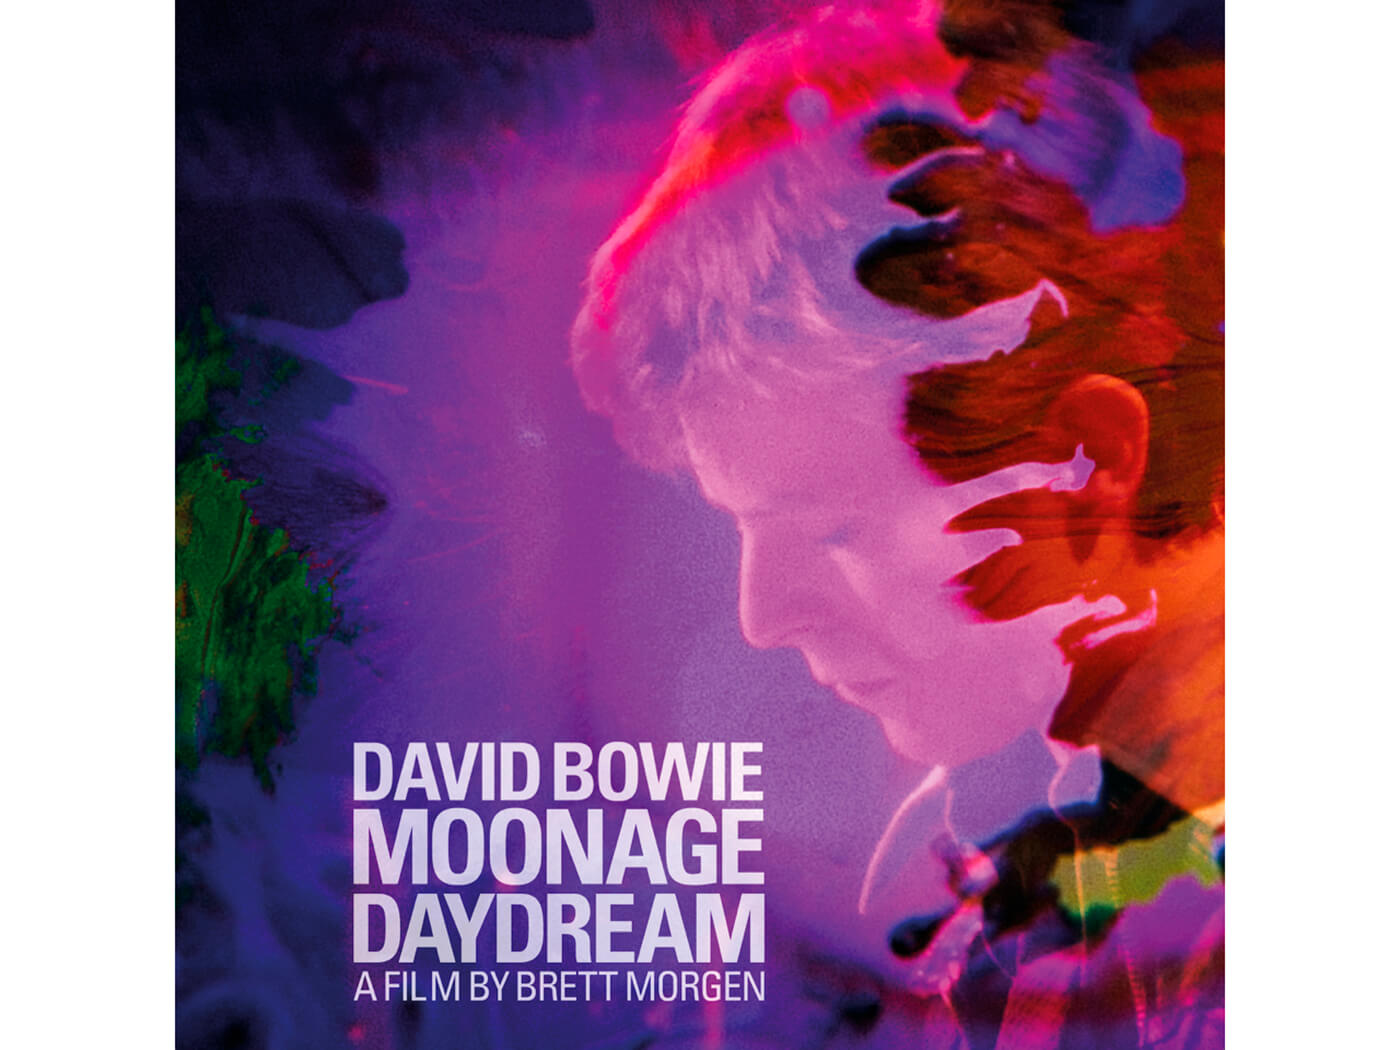 Soundtrack for David Bowie's Moonage Daydream doc revealed!